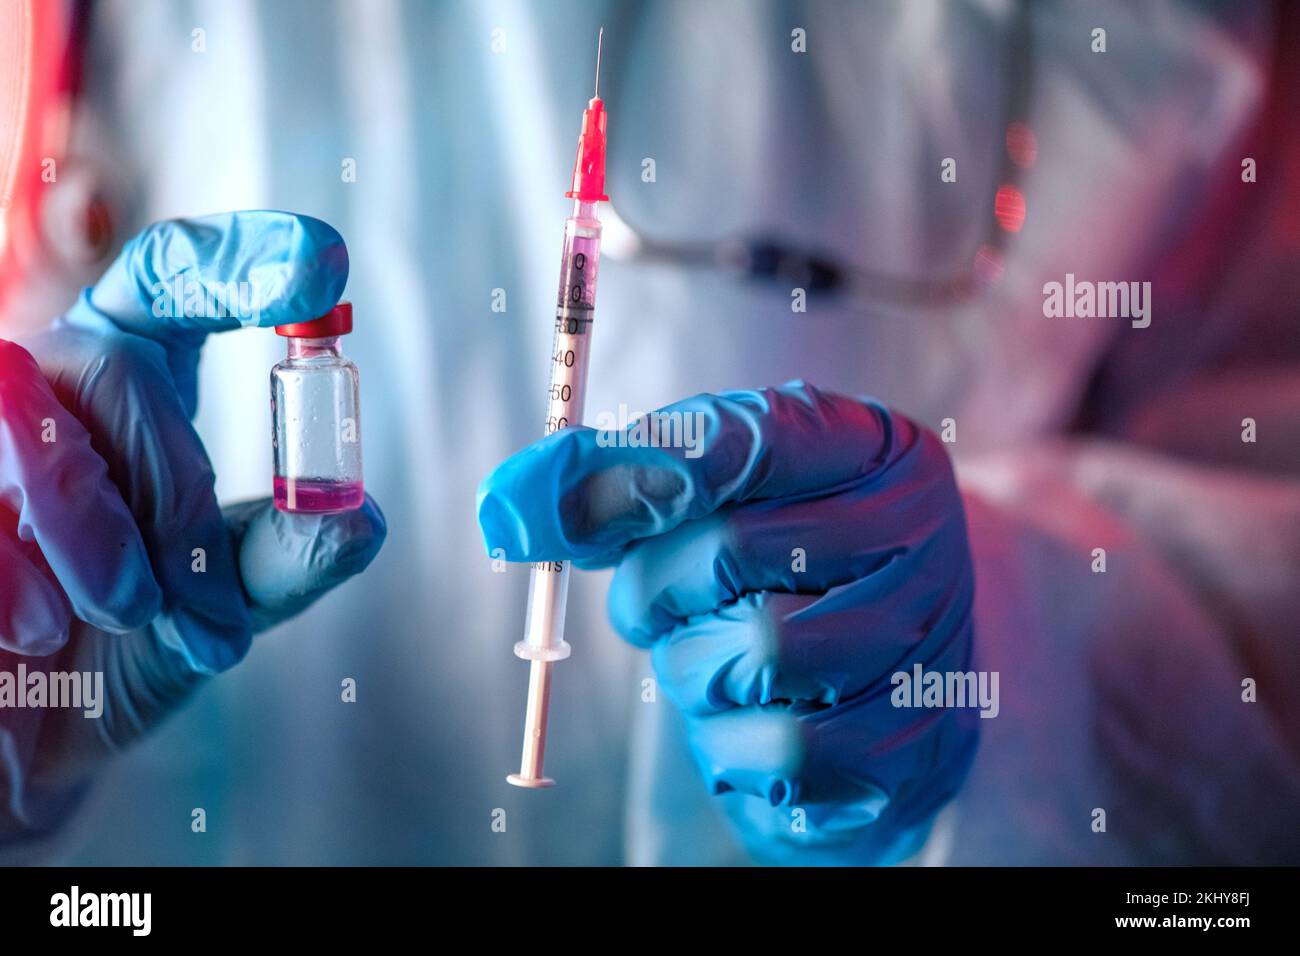 Medical hand glove blue vial vaccine hypodermic needle syringe injection treatment. Lab test immunization and vaccination concept. drug insulin care Stock Photo